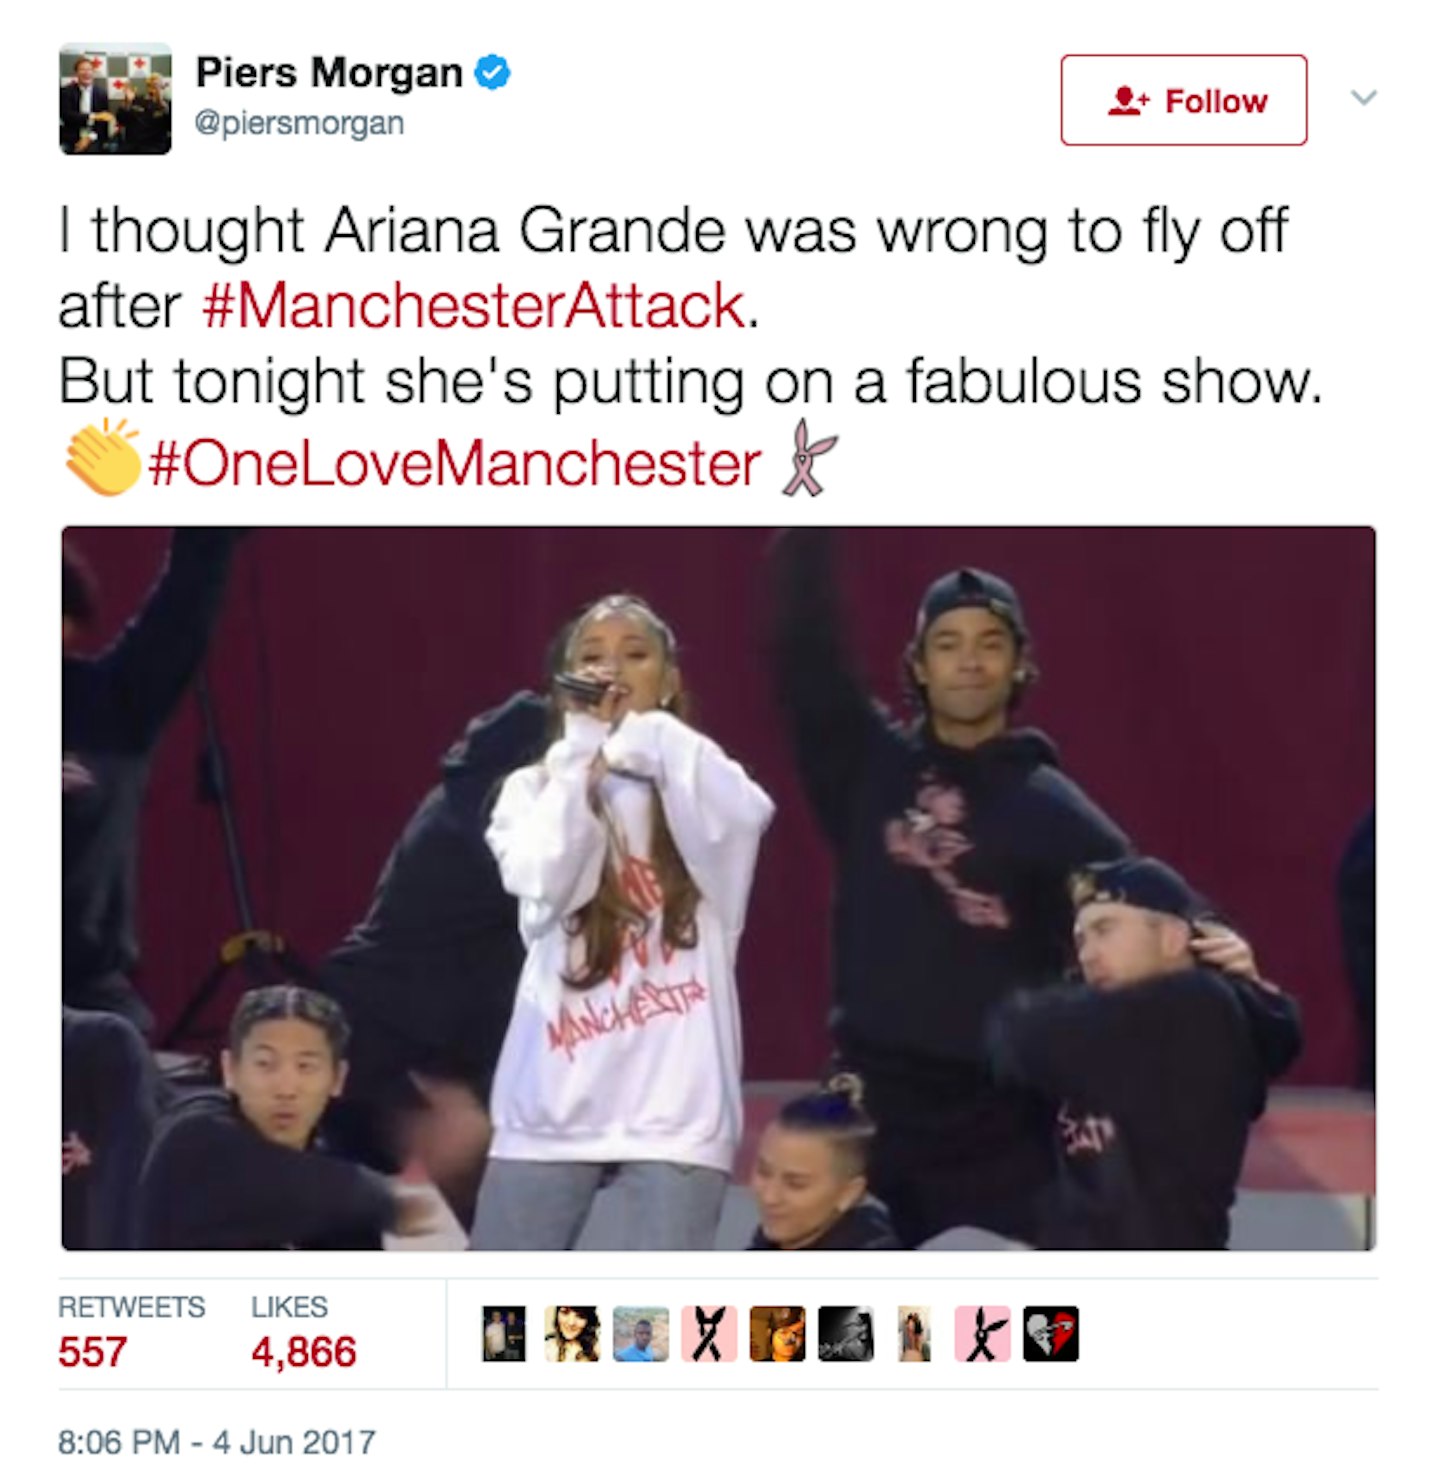 piers-morgan-apologises-ariana-grande-nasty-comments-manchester-attack-flew-home